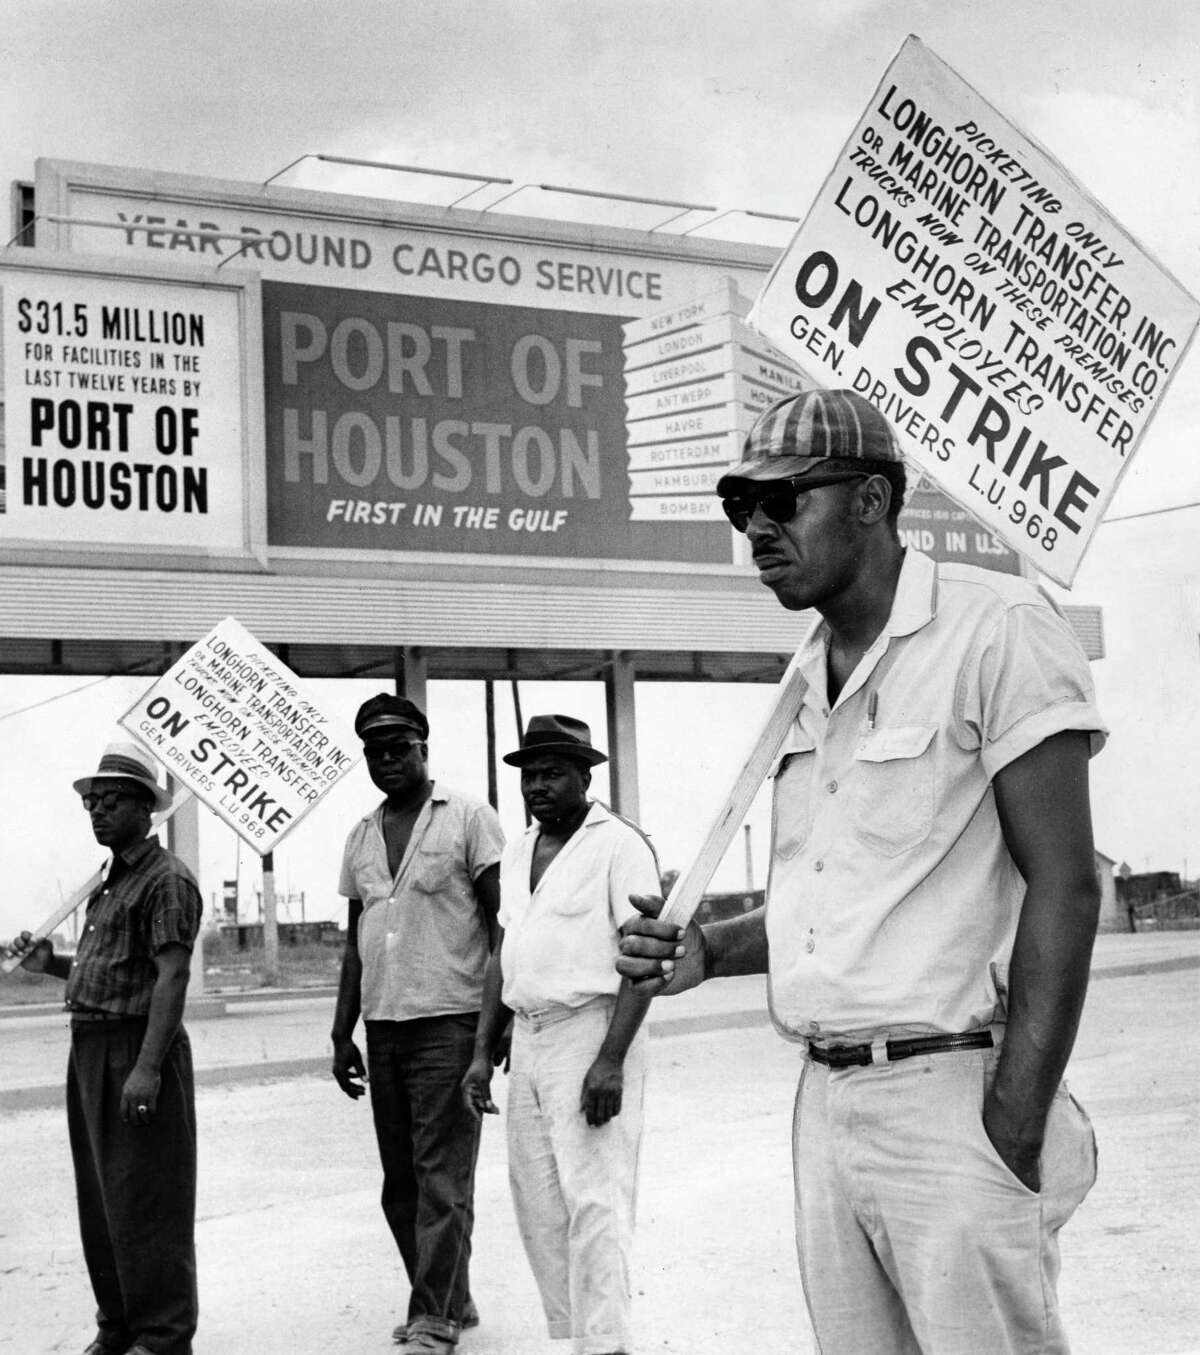 Teamster pickets who halted longshoremen again in port. From left, T.R. Fleming, C. Williams, Andrew Harris, and Dan Shannon walk the picket line during a longshoremen strike at the Port of Houston in 1963.